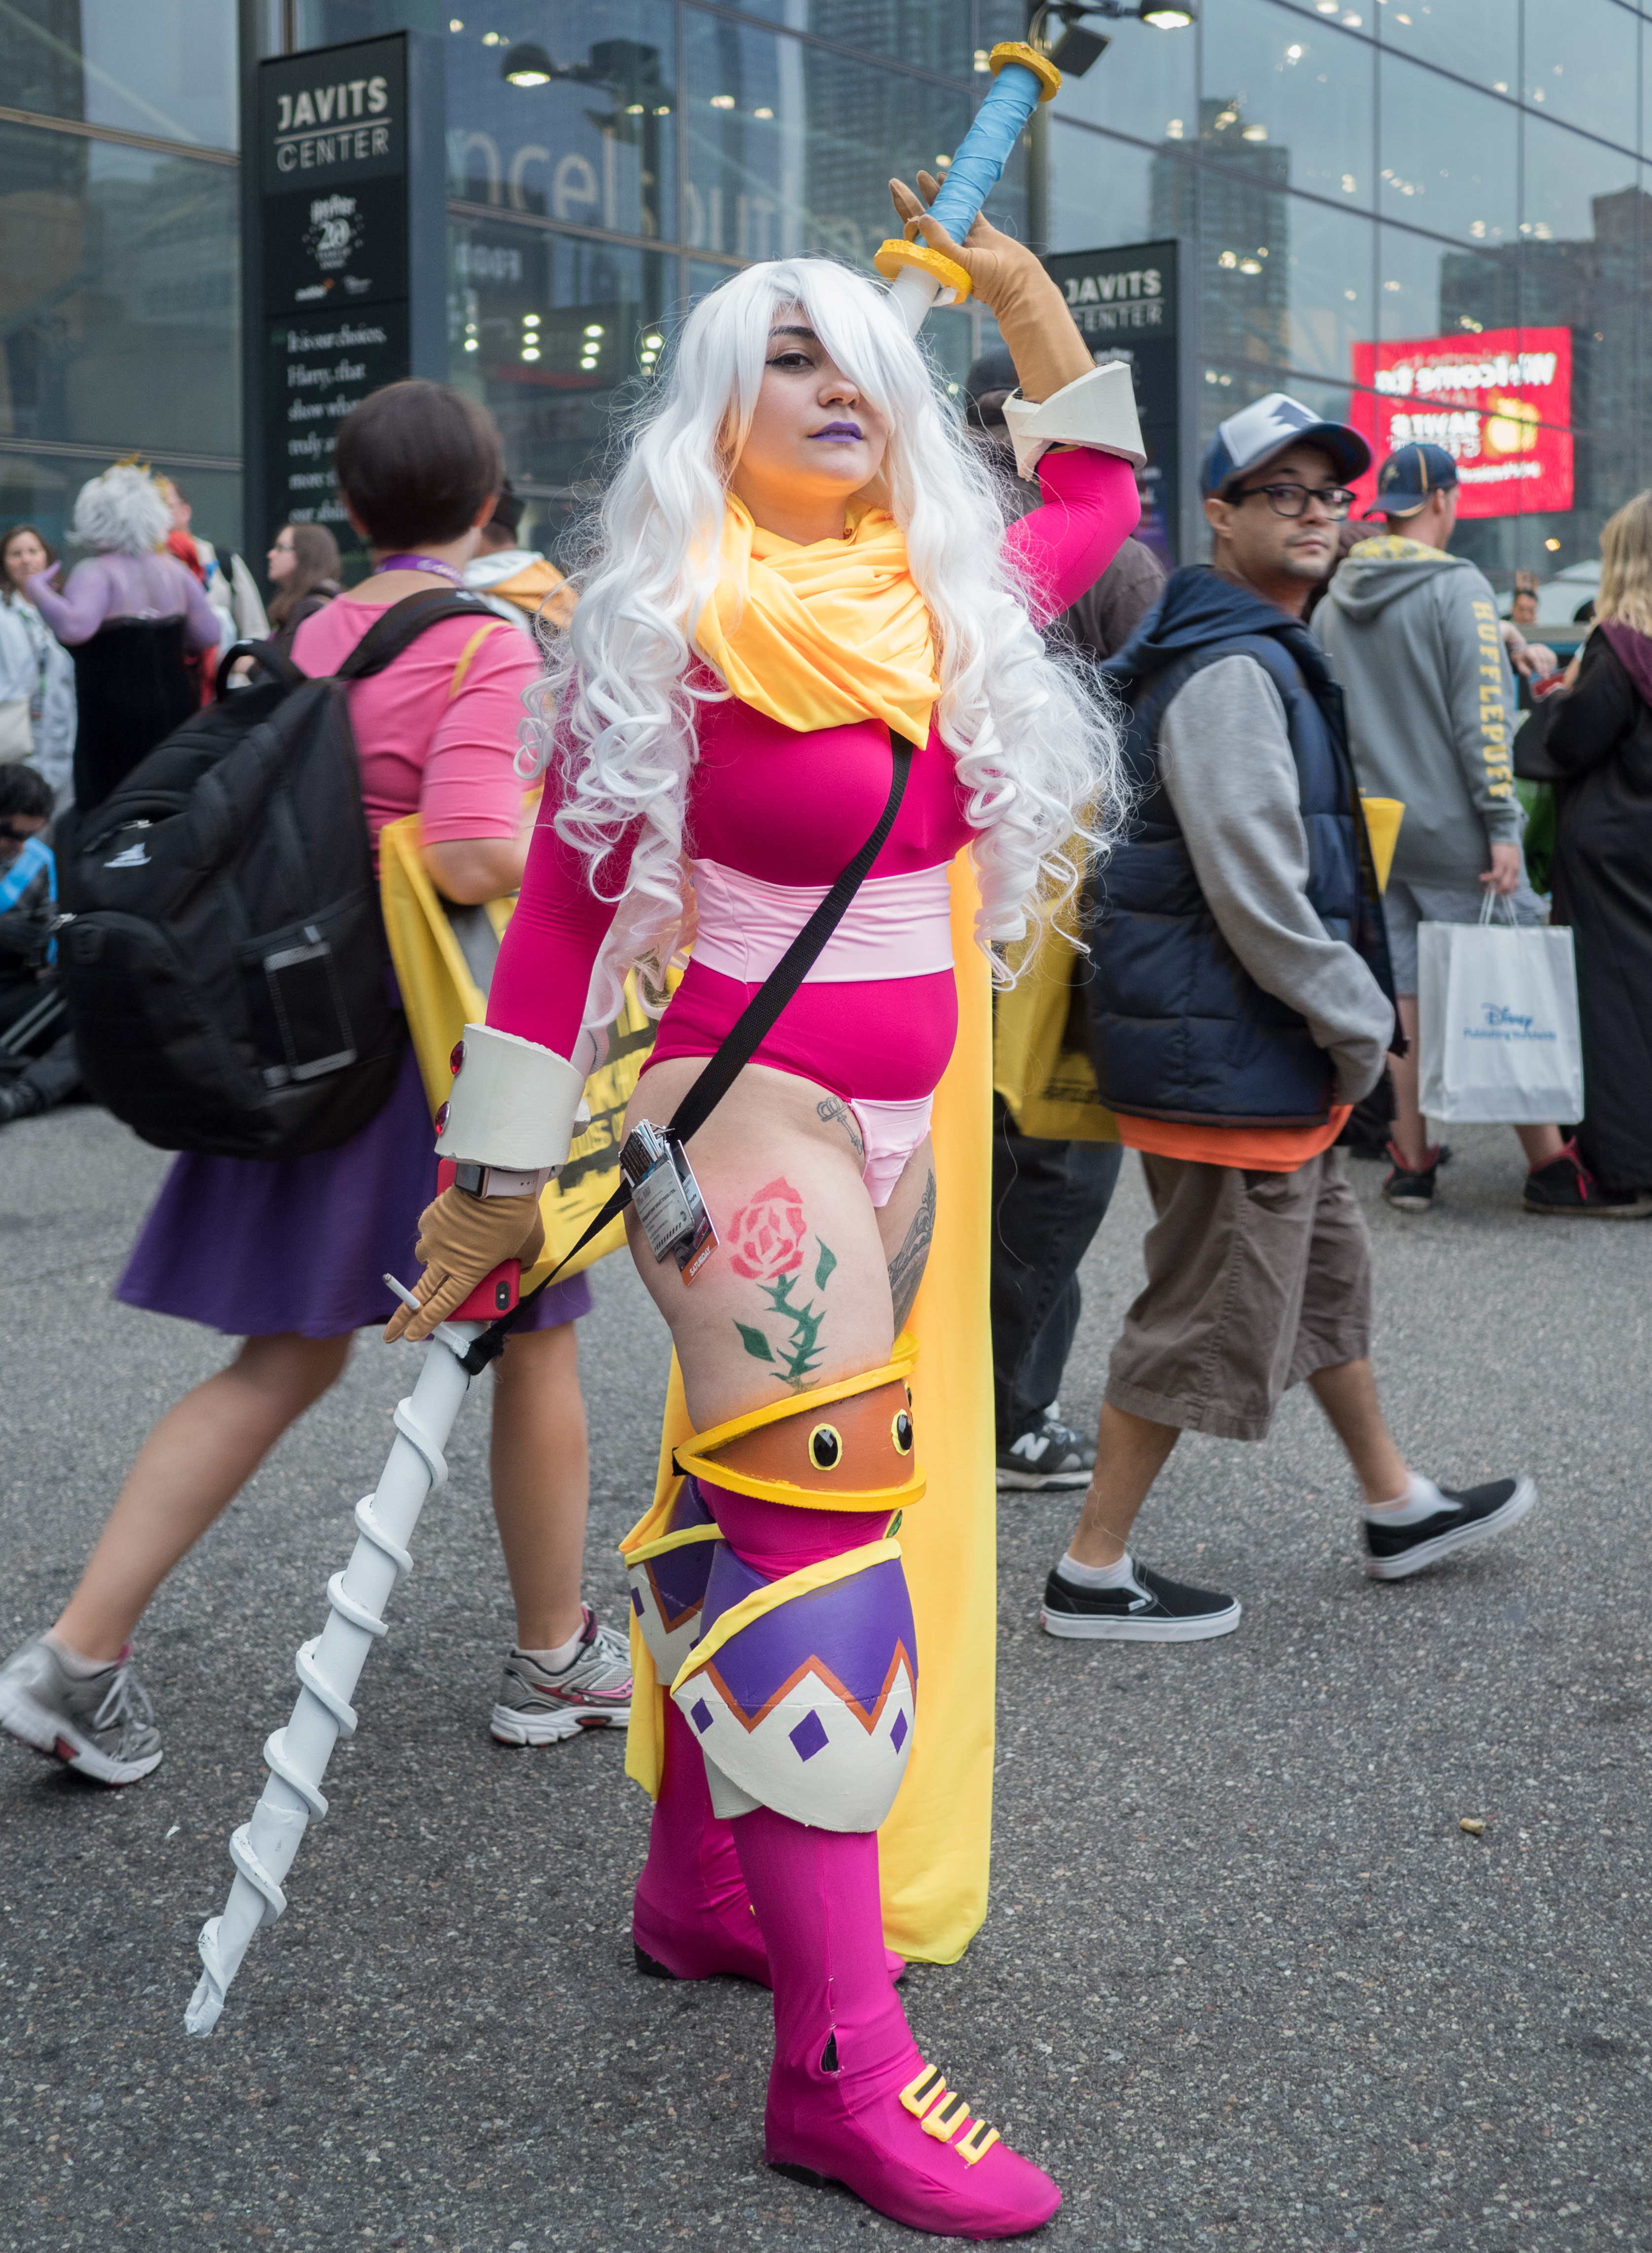 File:Cosplay at NYCC (60614).jpg - Wikimedia Commons